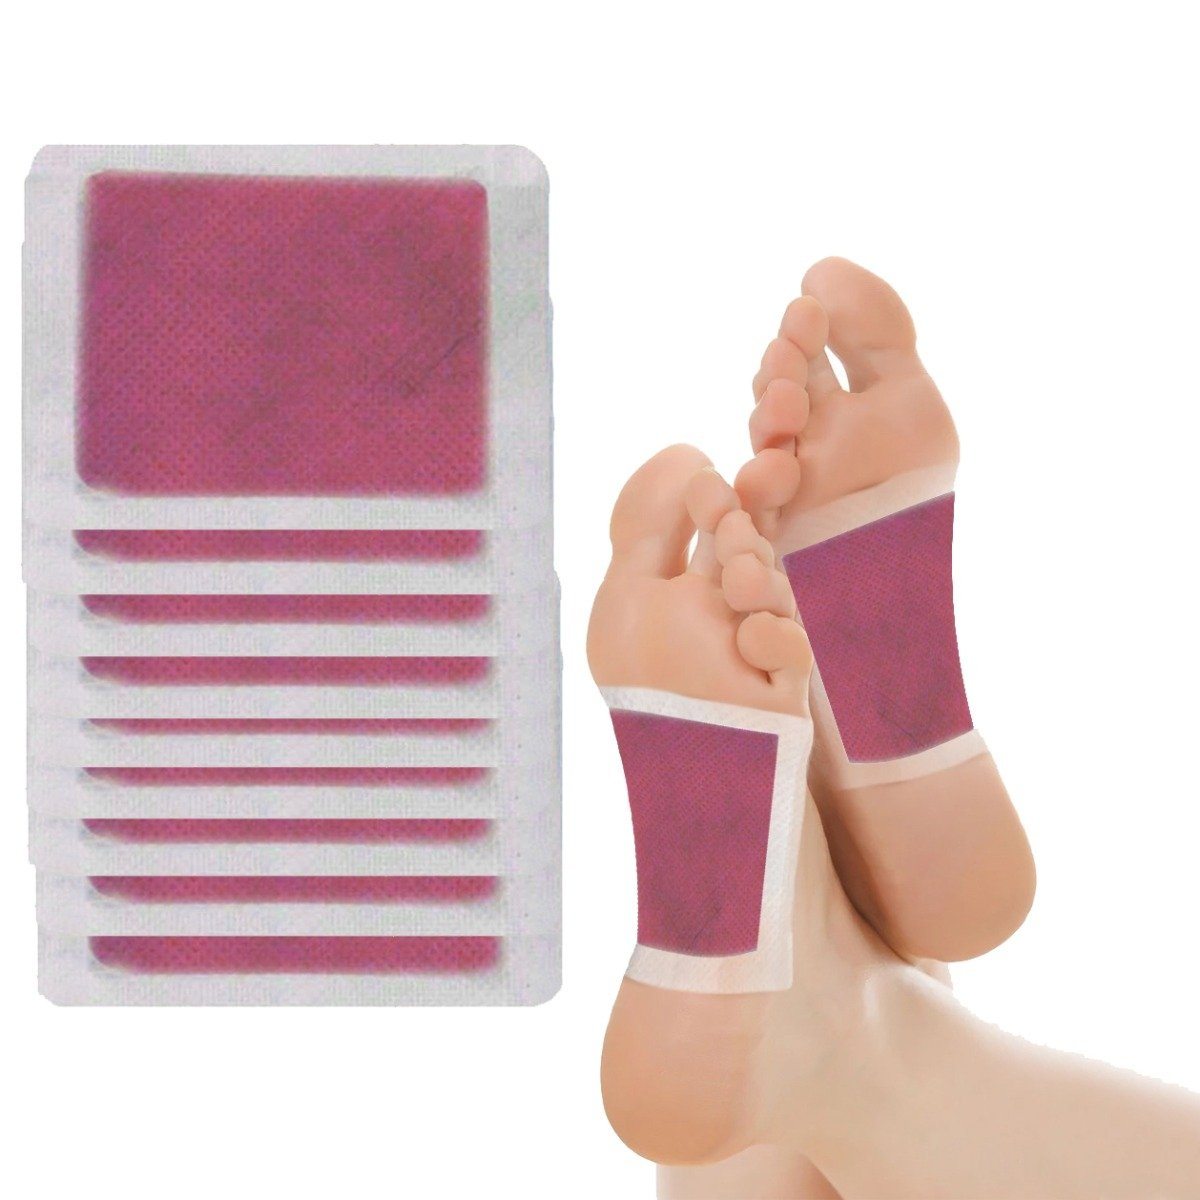 10-Pack: Detoxifying Scented Bamboo Foot Pads